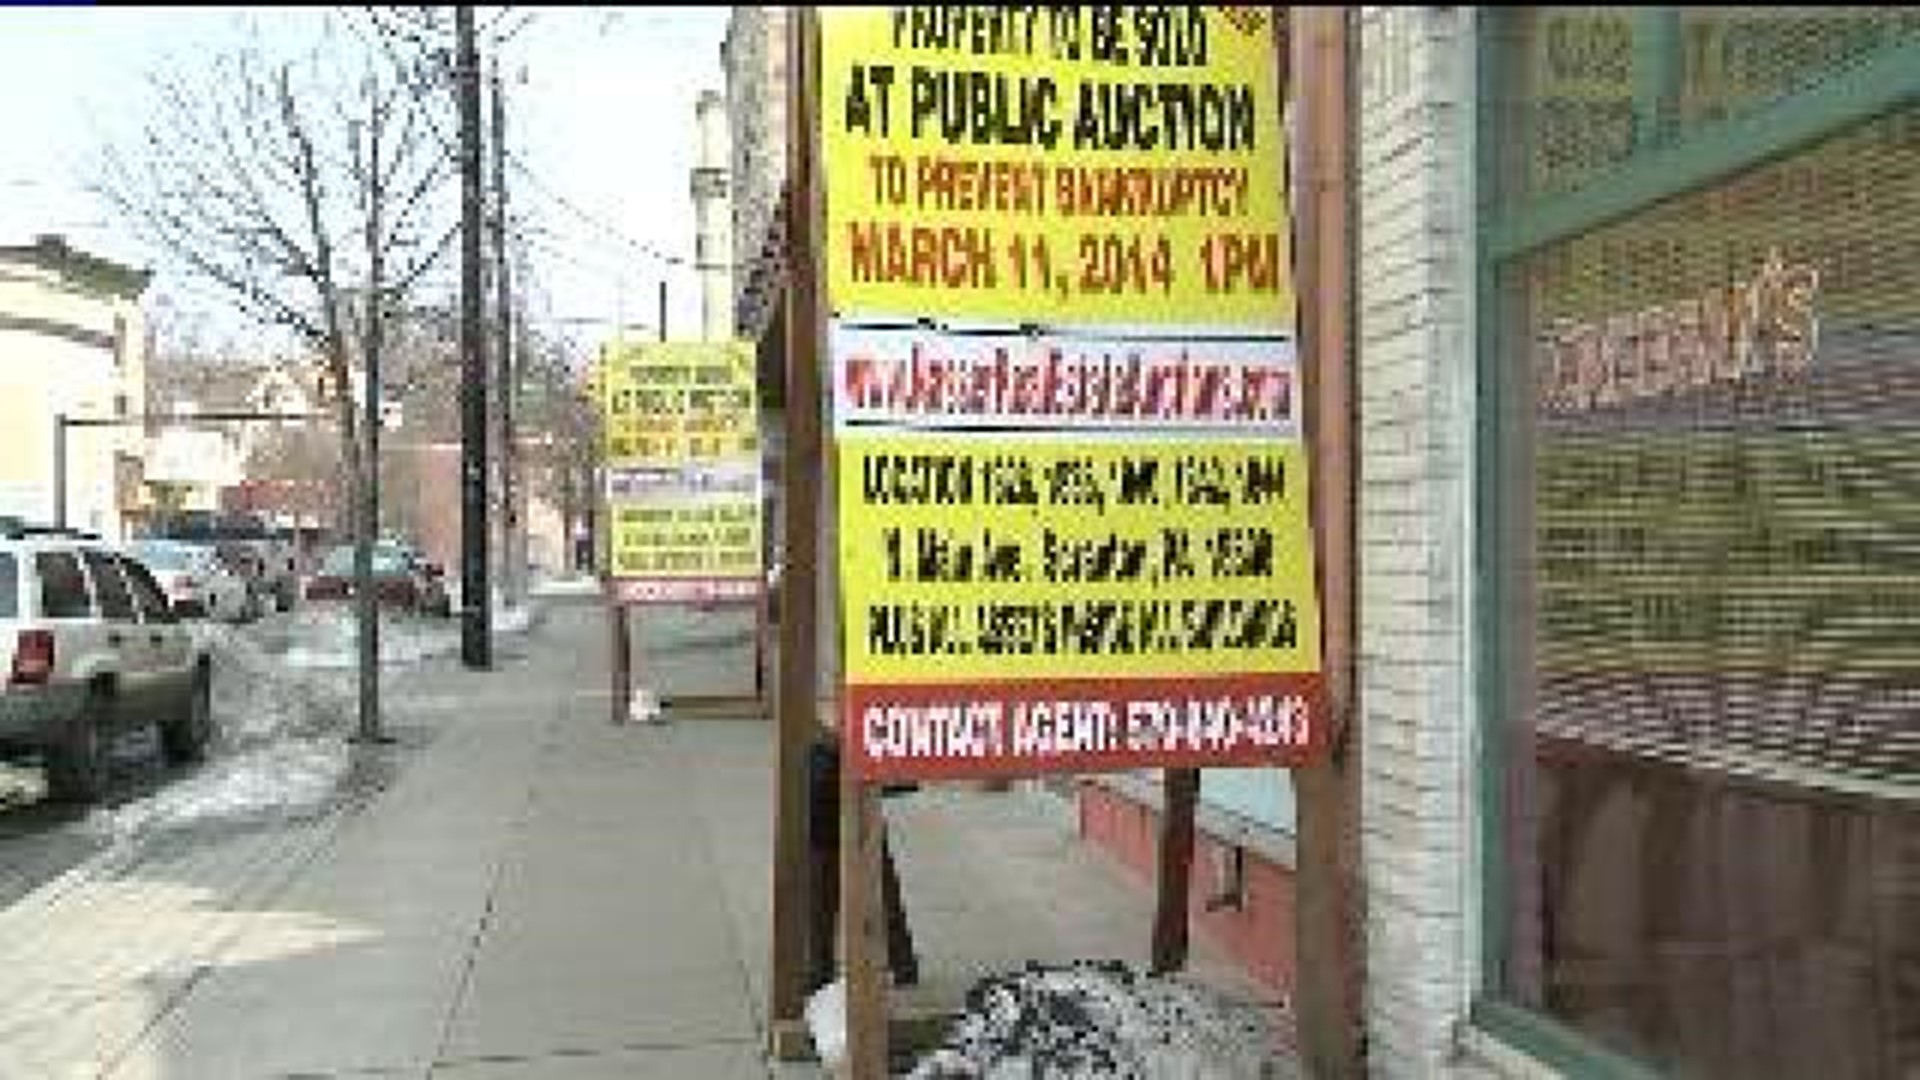 Old Castle, Other Commercial Buildings To Be Auctioned